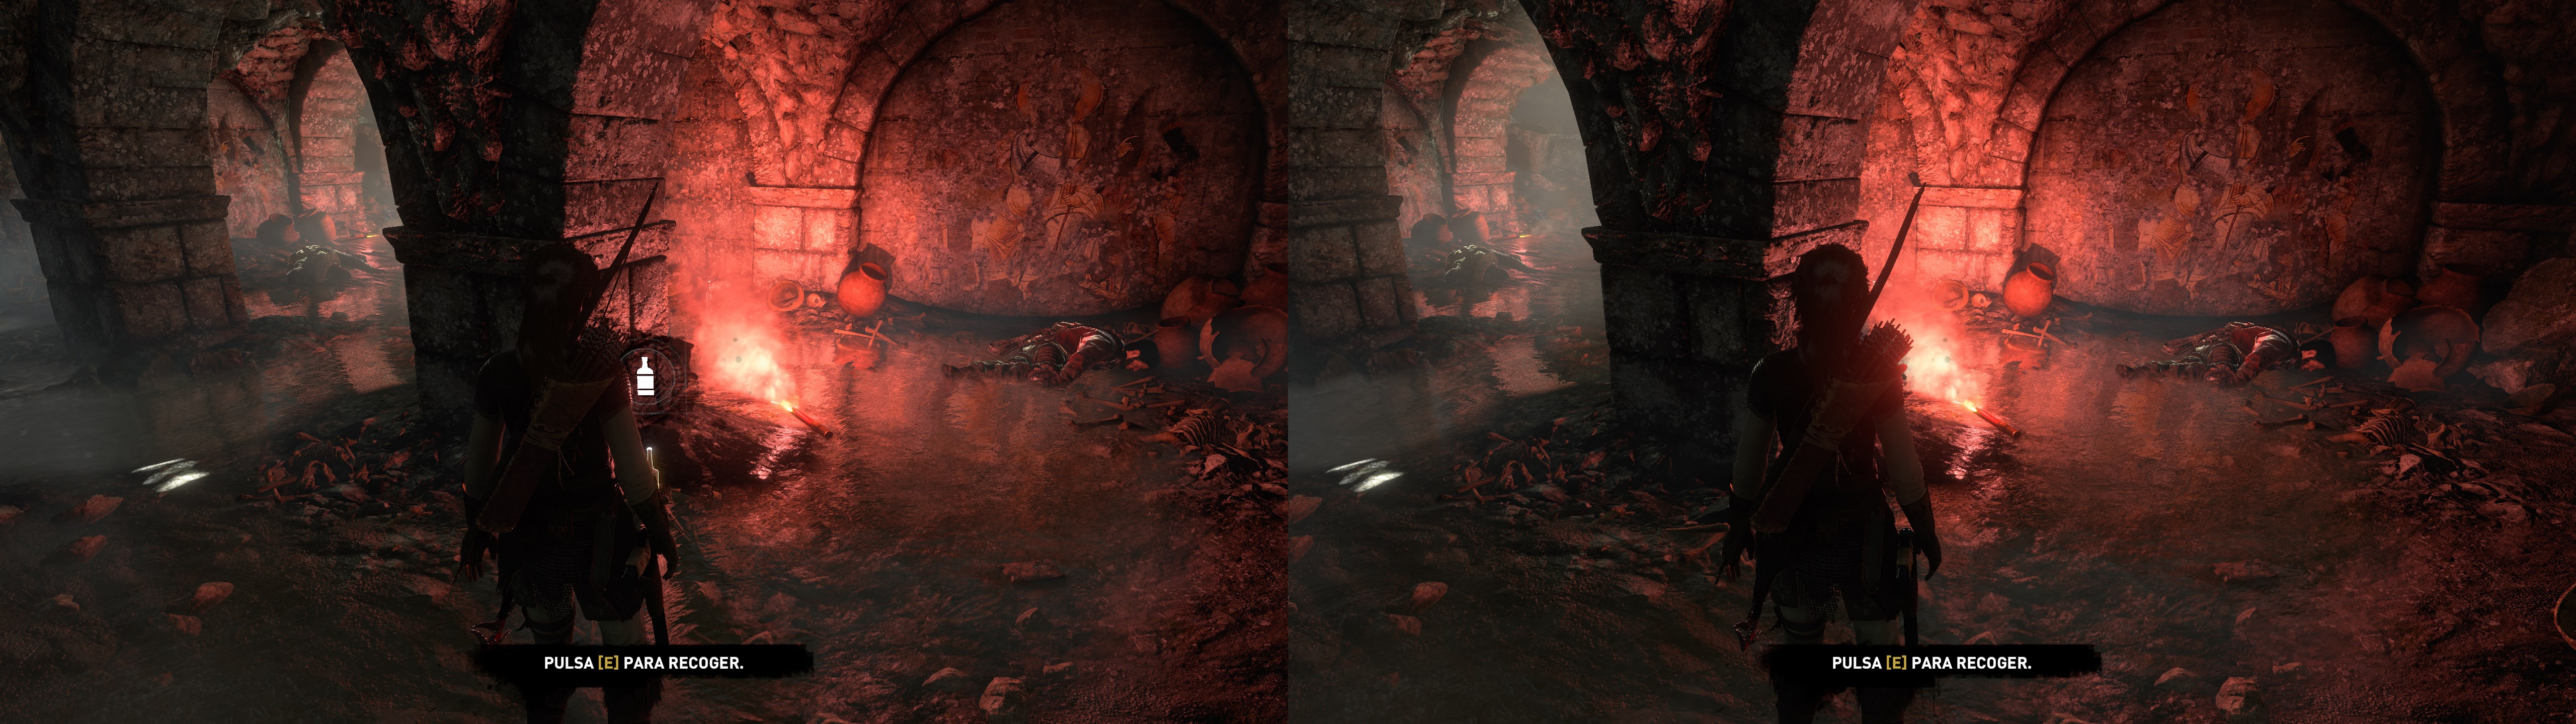 3d rise of the tomb raider image